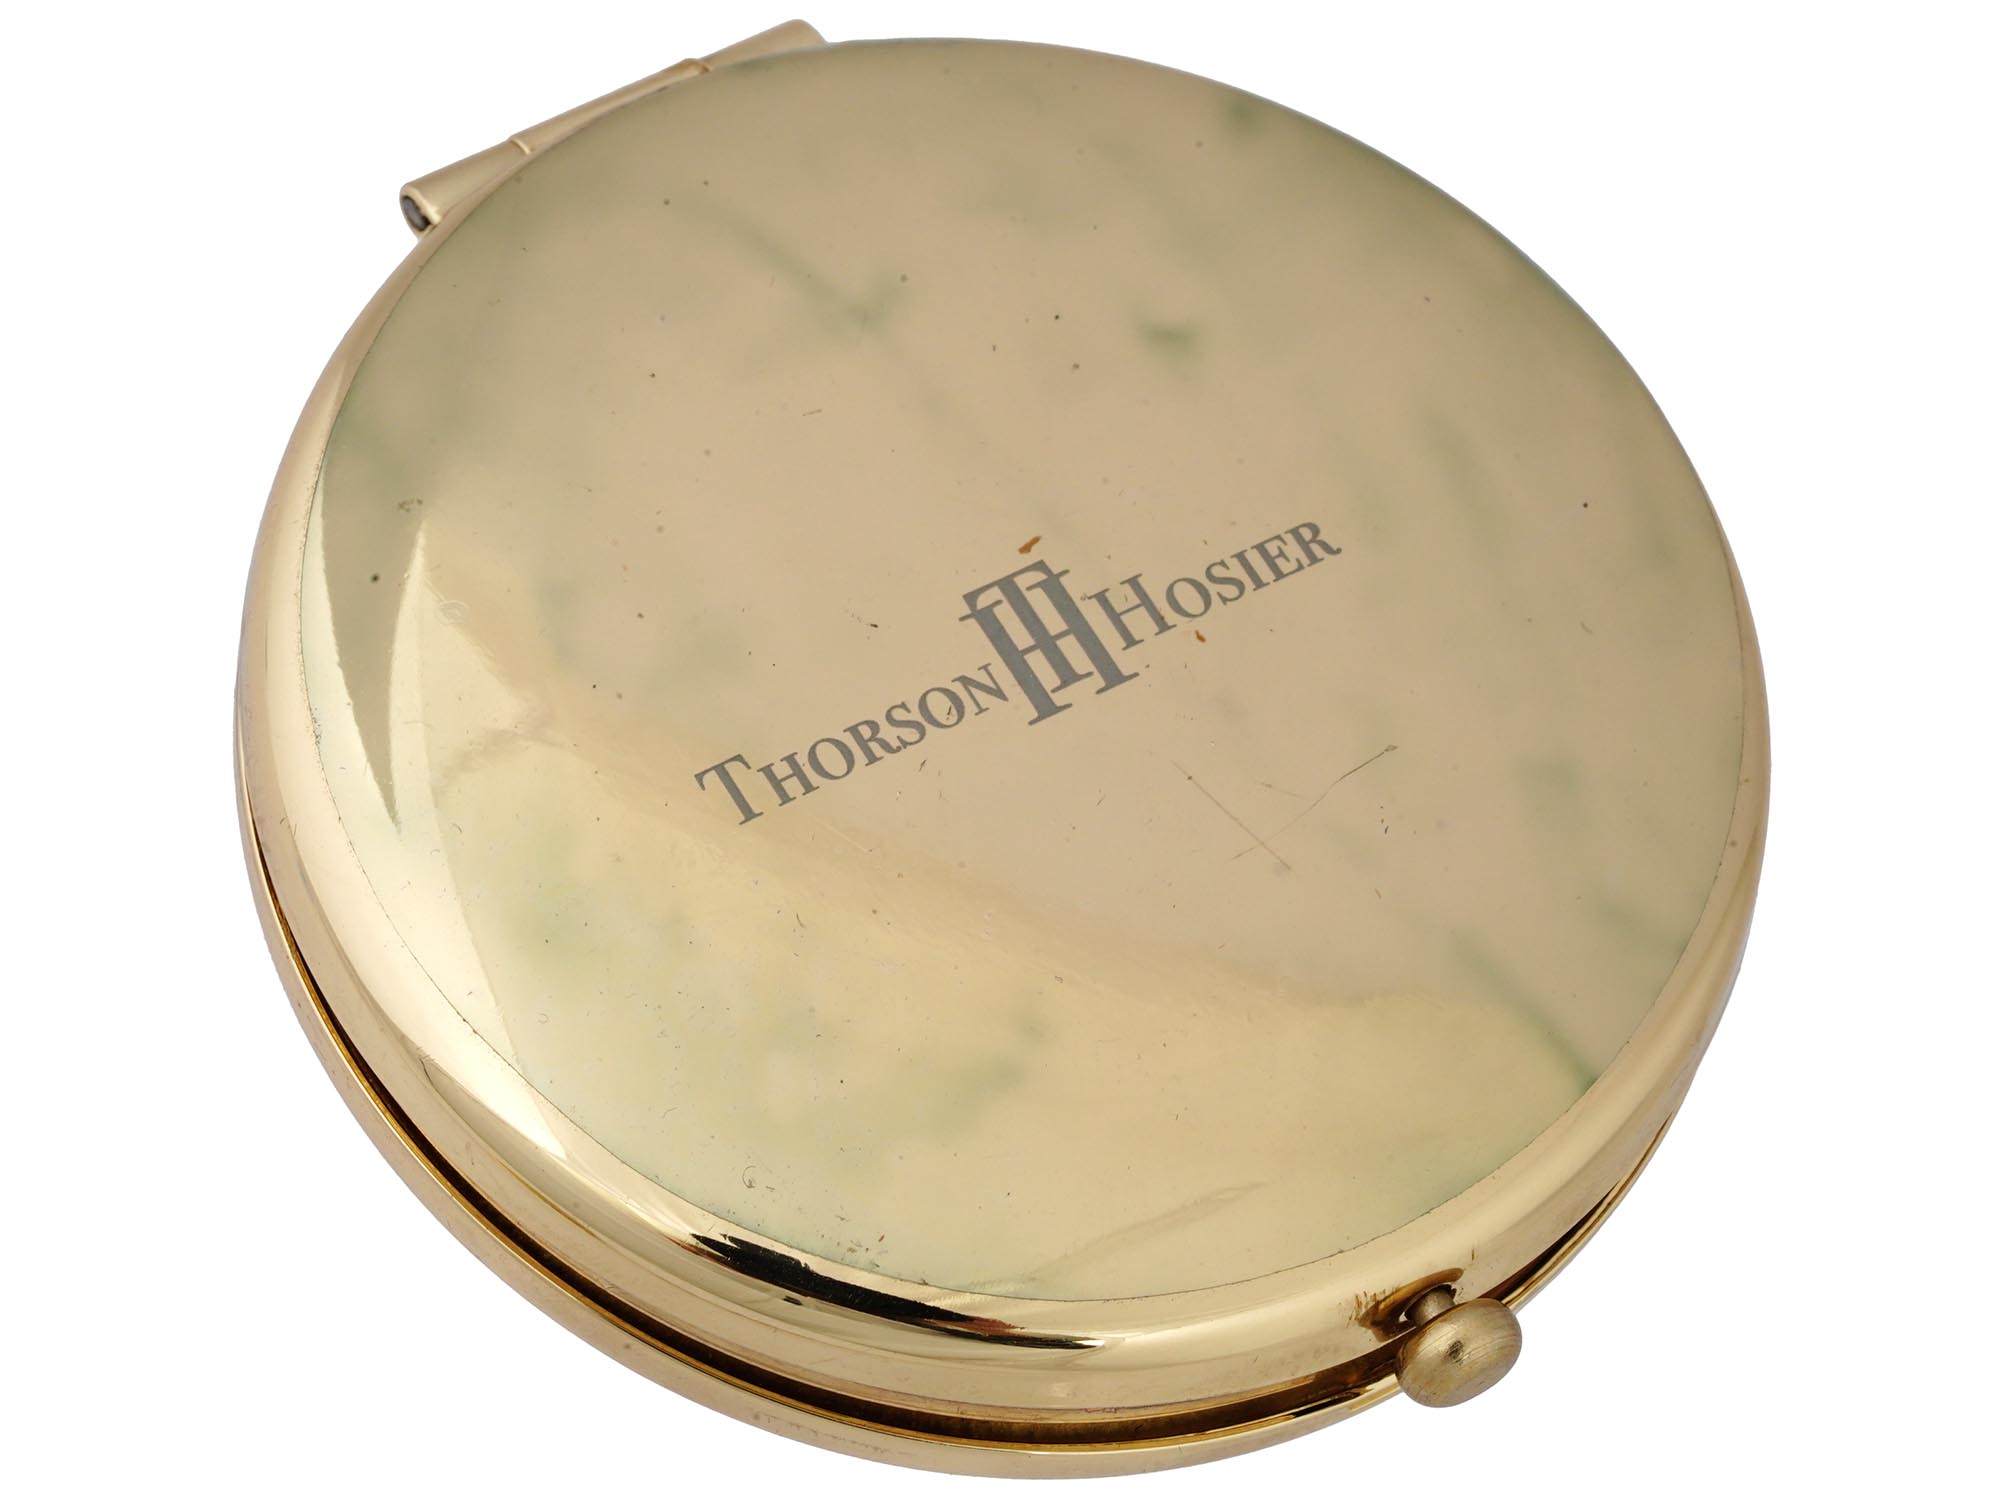 JAY STRONGWATER AND THORSON HOSIER COMPACT MIRRORS PIC-6